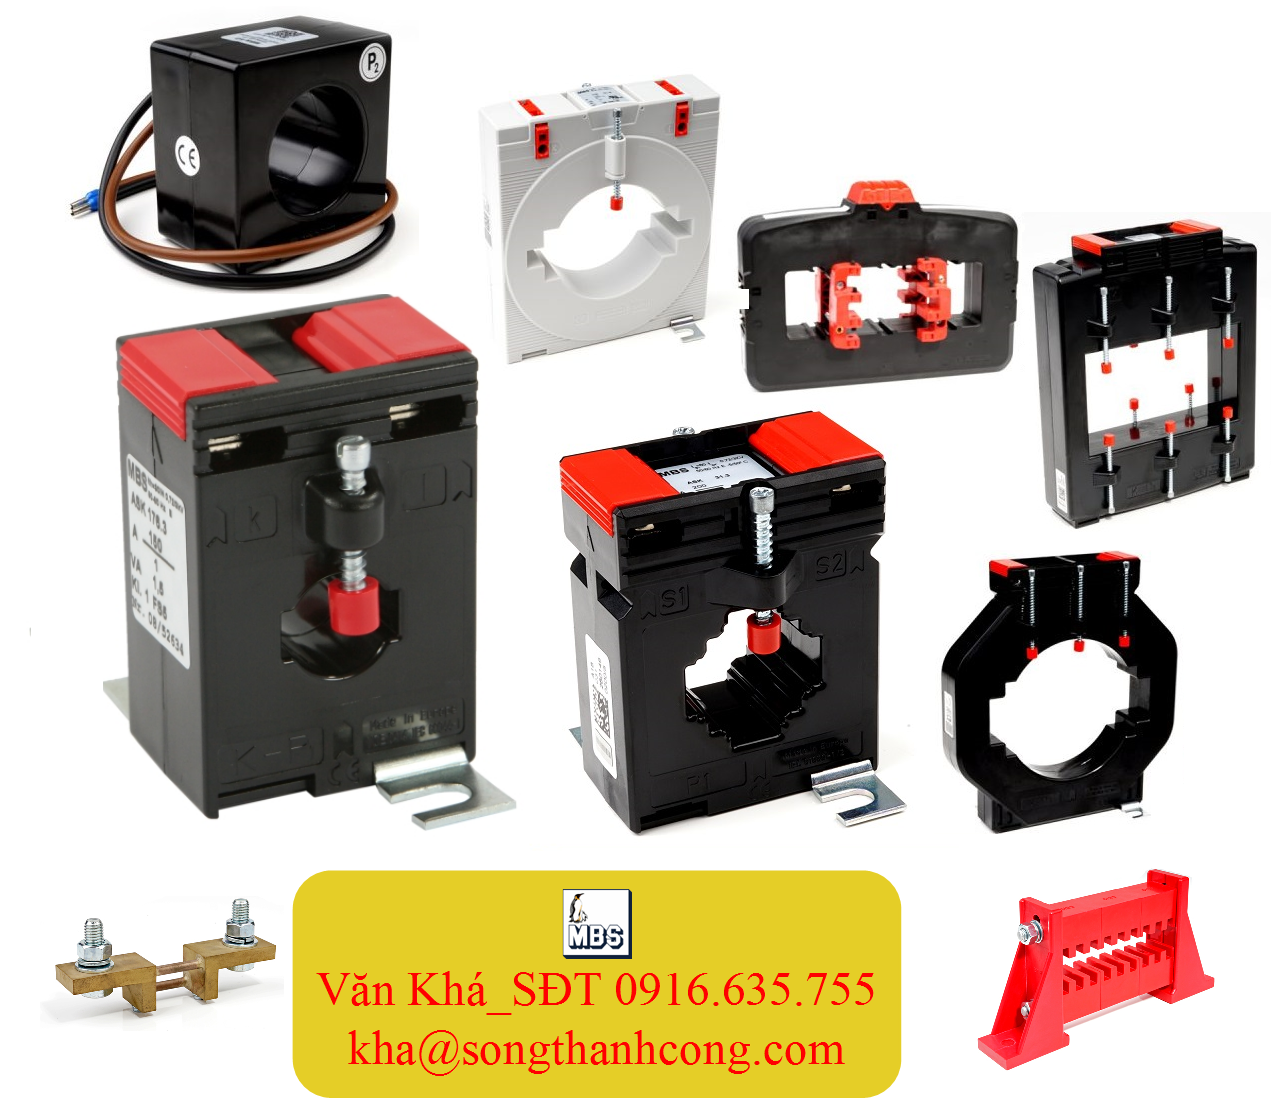 ct-ask-176-3-current-transformer-day-do-75-250-a-xuat-xu-germany-stc-viet-nam.png